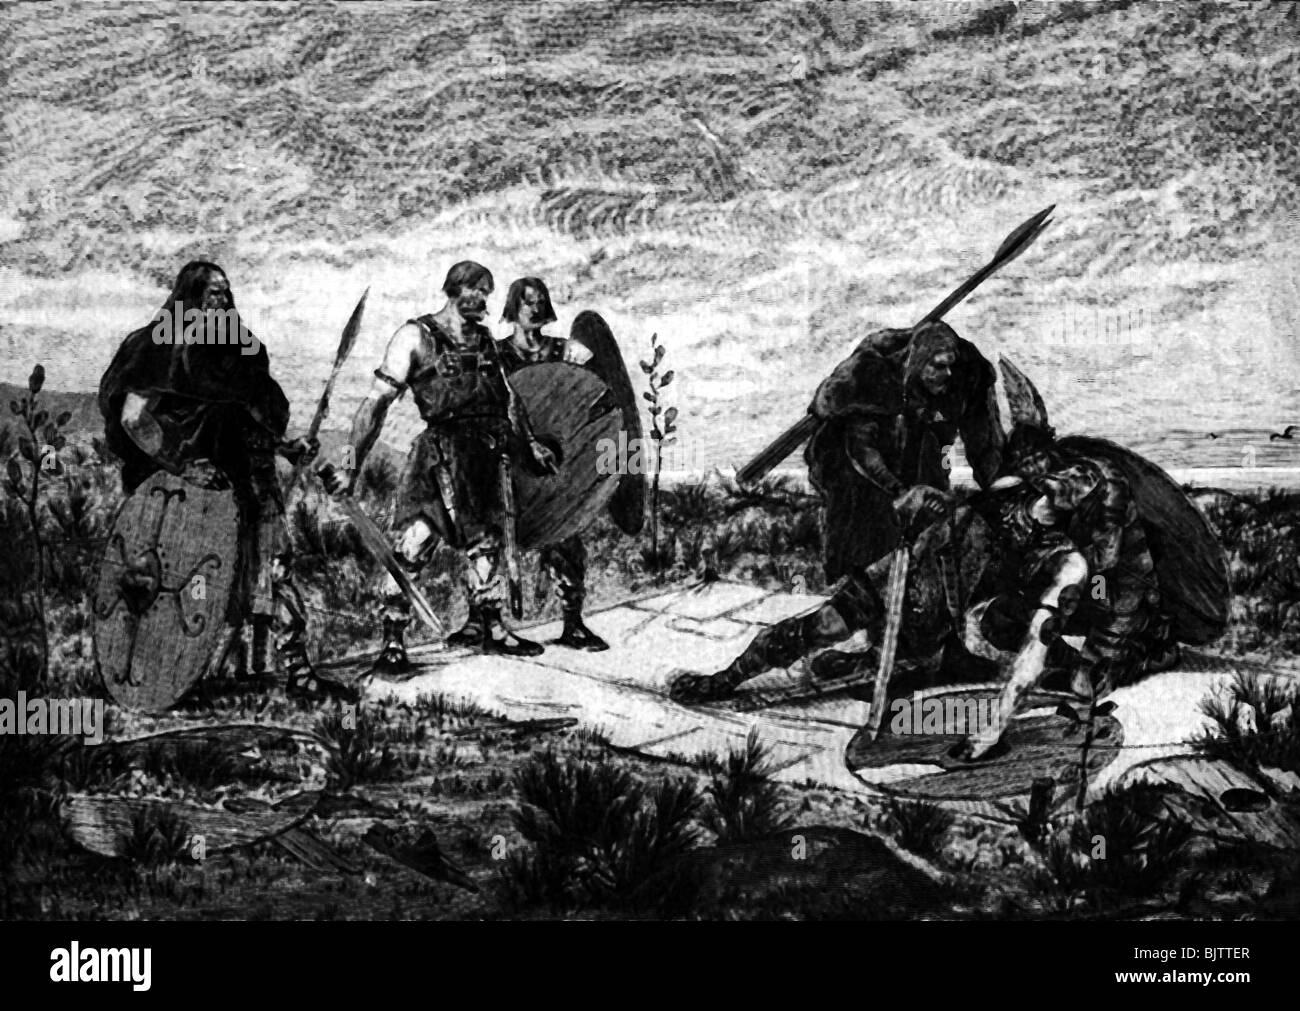 Ancient World, Germanics, tradition, duel, Holmgang, wood engraving, 19th century, historic, historical, weapons, arms, warriors, Germanic warrior, wounded, ancient world, people, Stock Photo